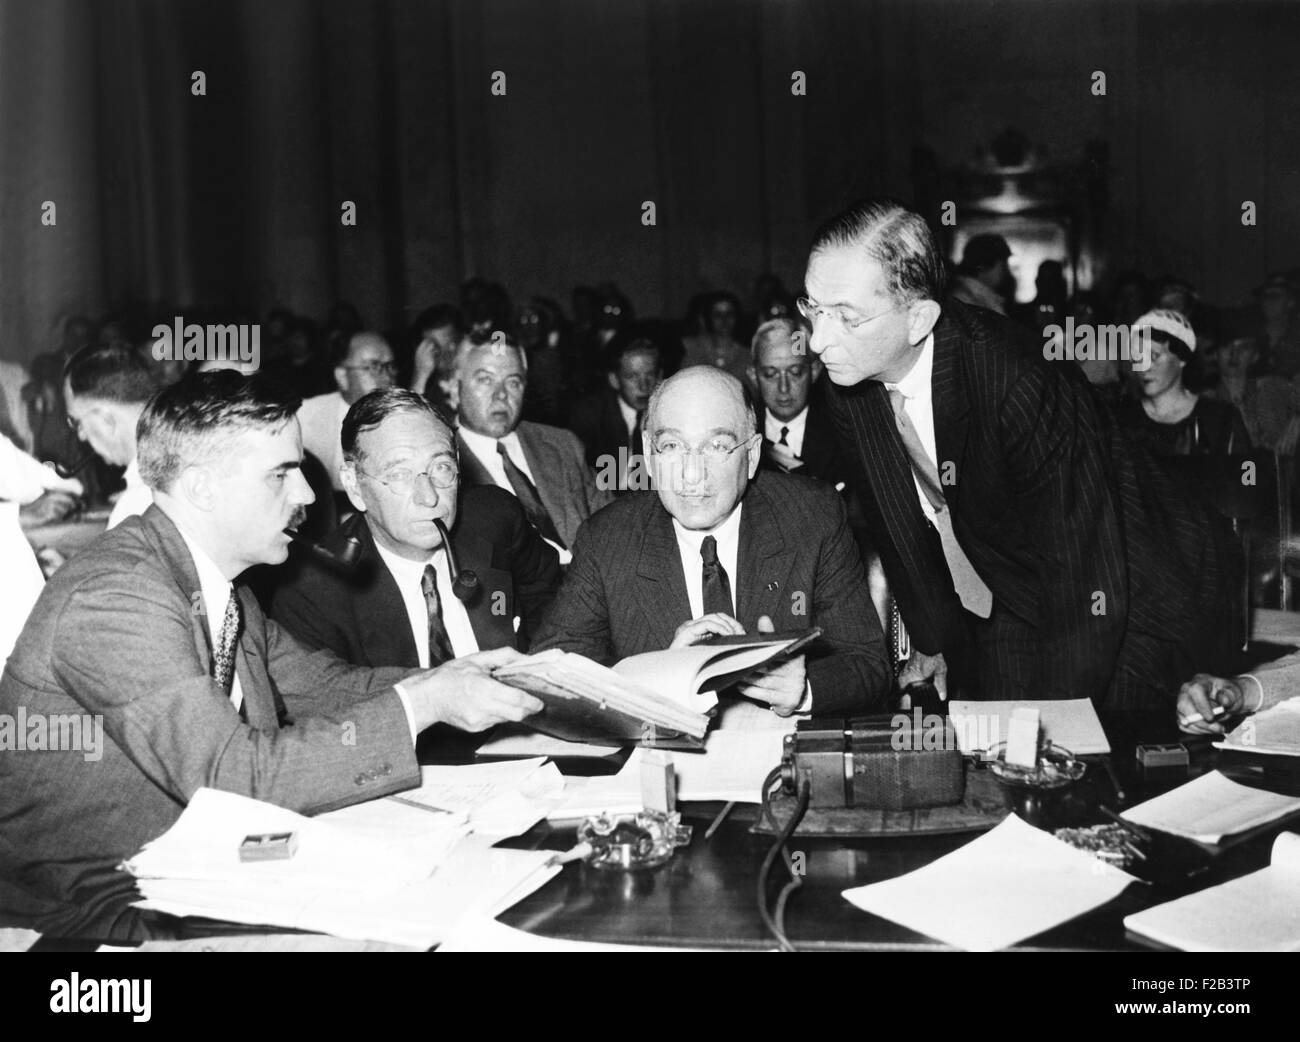 Senate Munitions Investigating Committee, Sept. 12, 1934. L-R: Stephen Rauschenbach, Chief Investigator for the Munitions Committee; Irenee, Pierre, and Lammot DuPont, looking over evidence at the witness stand. - (CSU 2015 5 47) Stock Photo